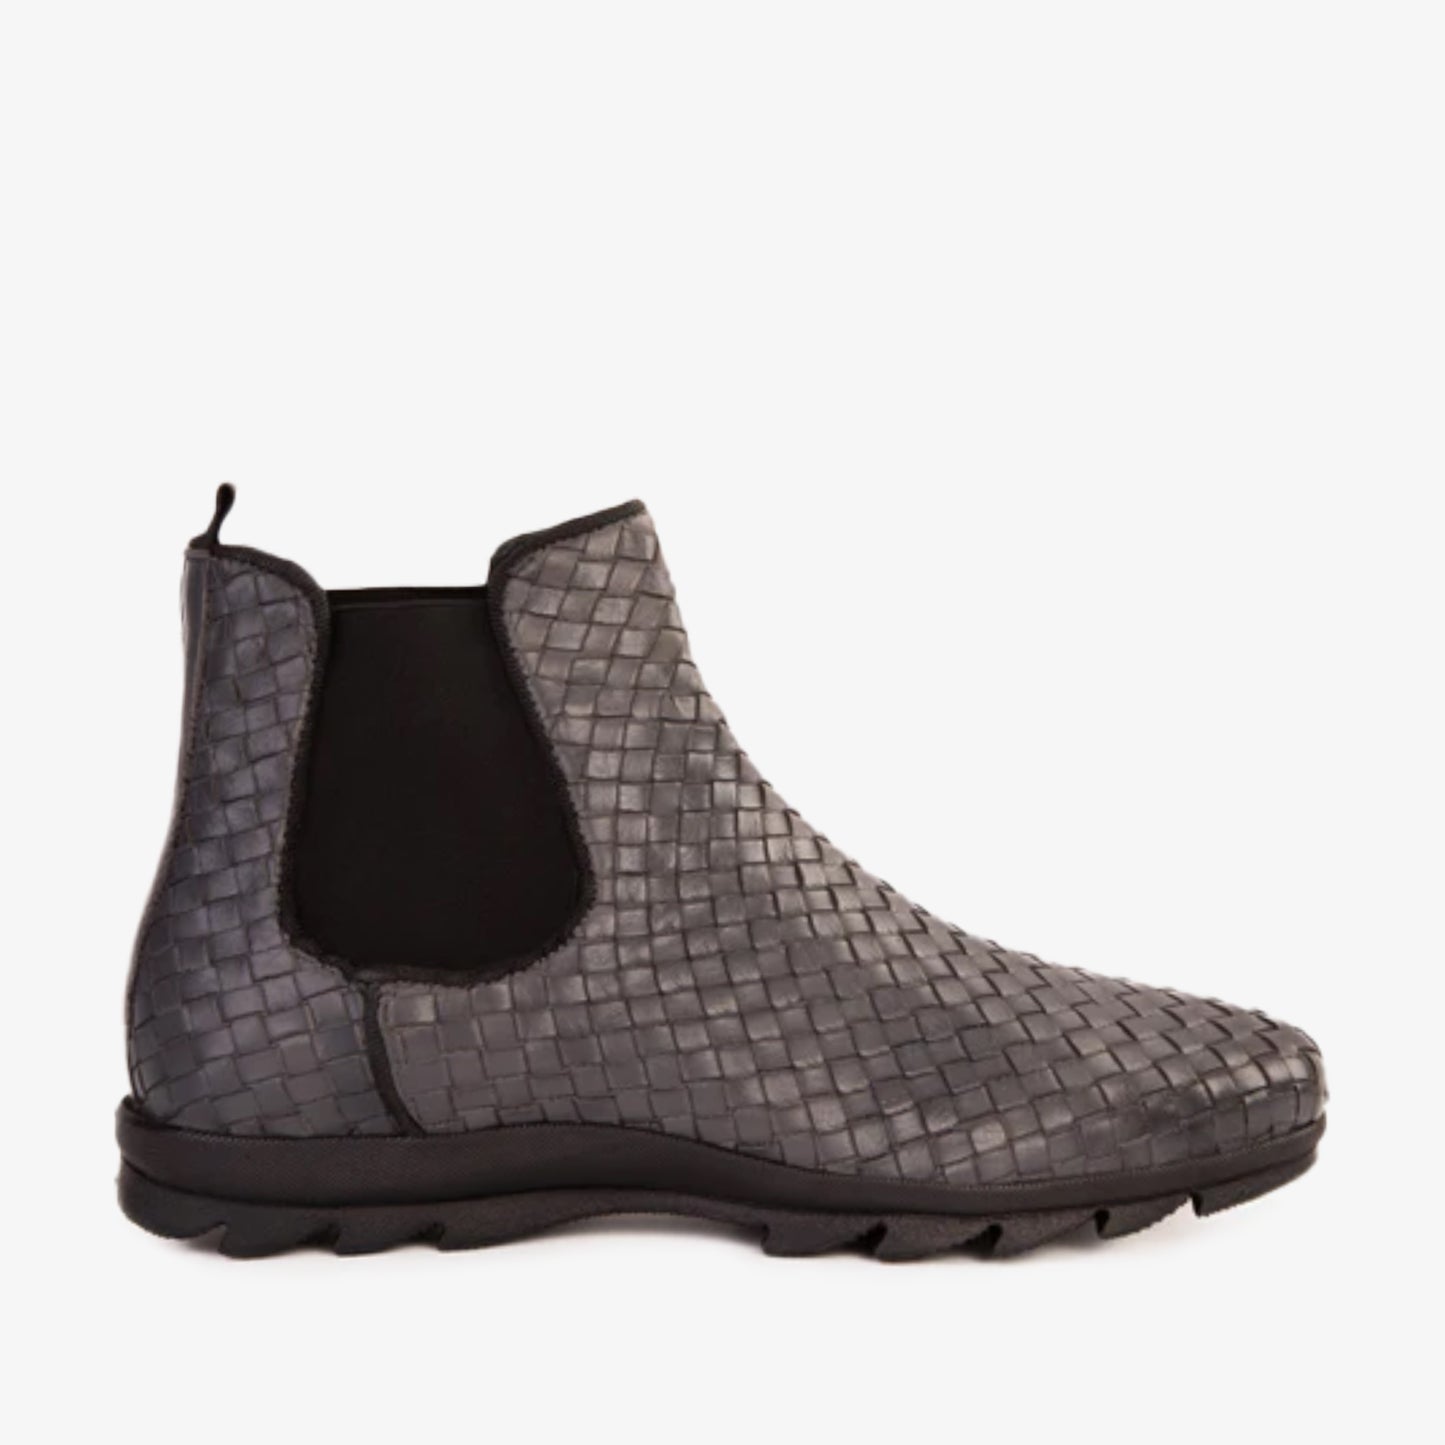 The Luxpre Grey Leather Handwoven Casual Chelsea Men Boot